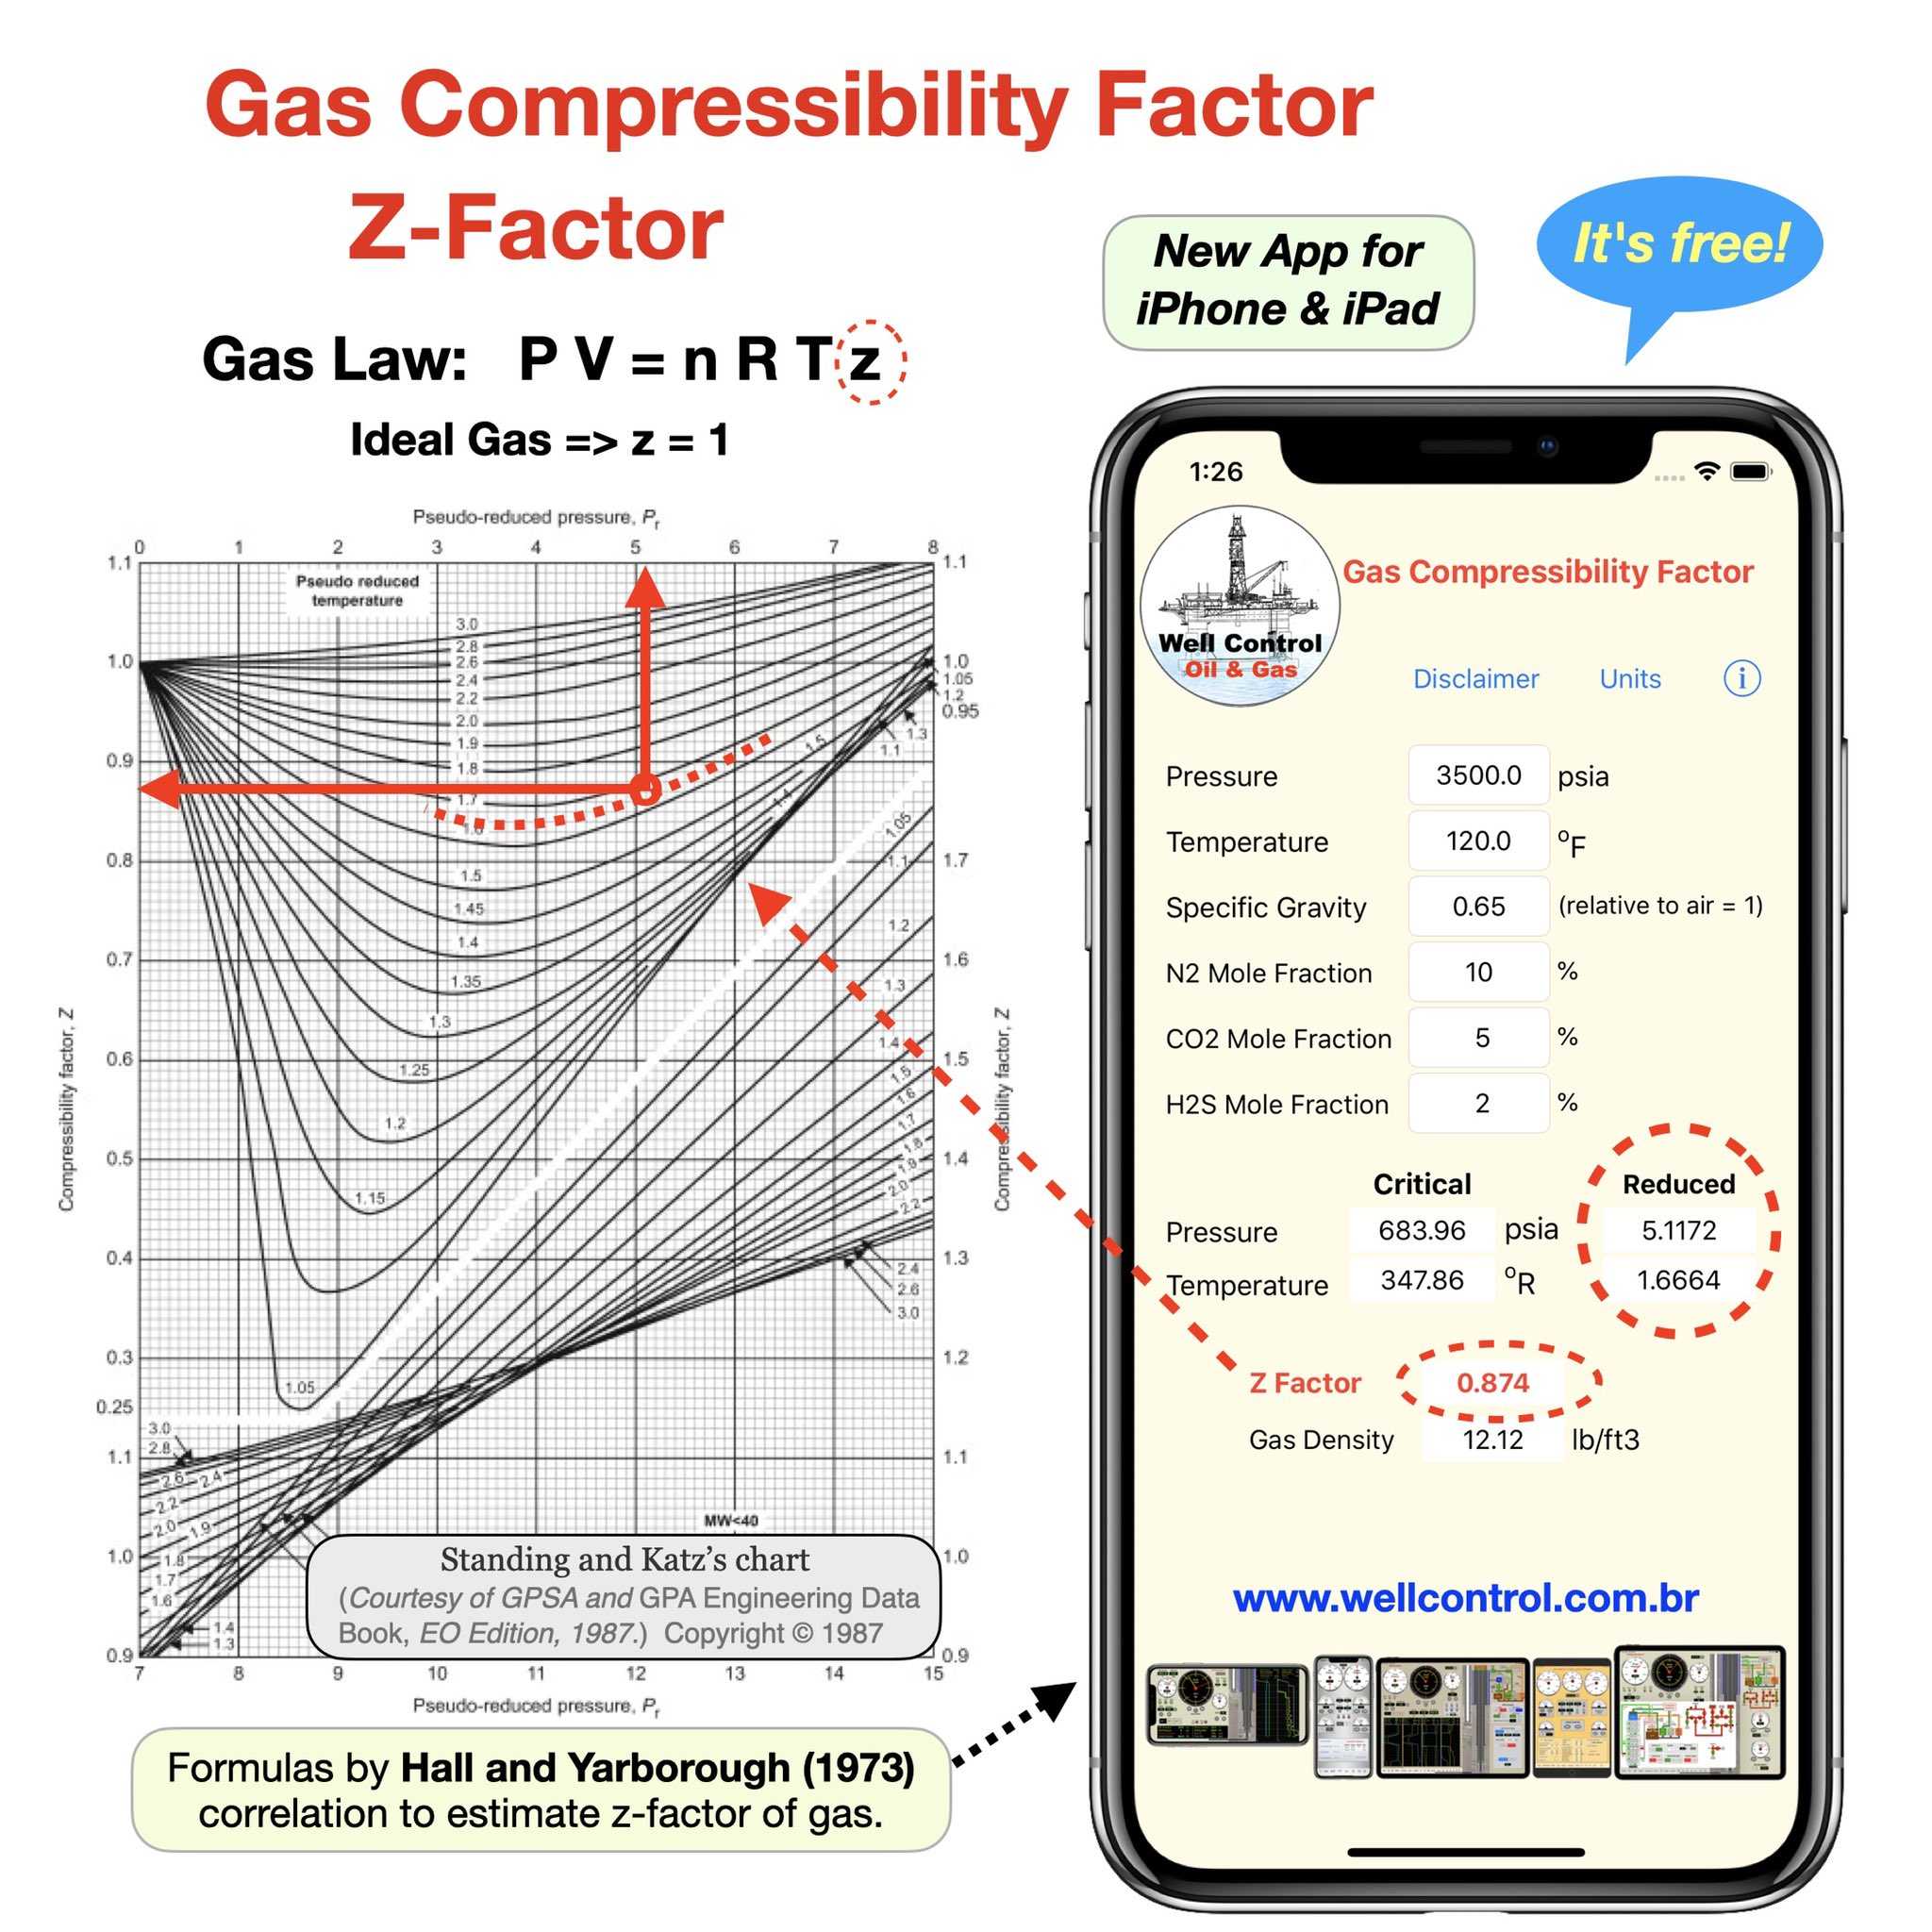 Oil & Gas Softwares on X: Gas Compressibility Factor Calculator